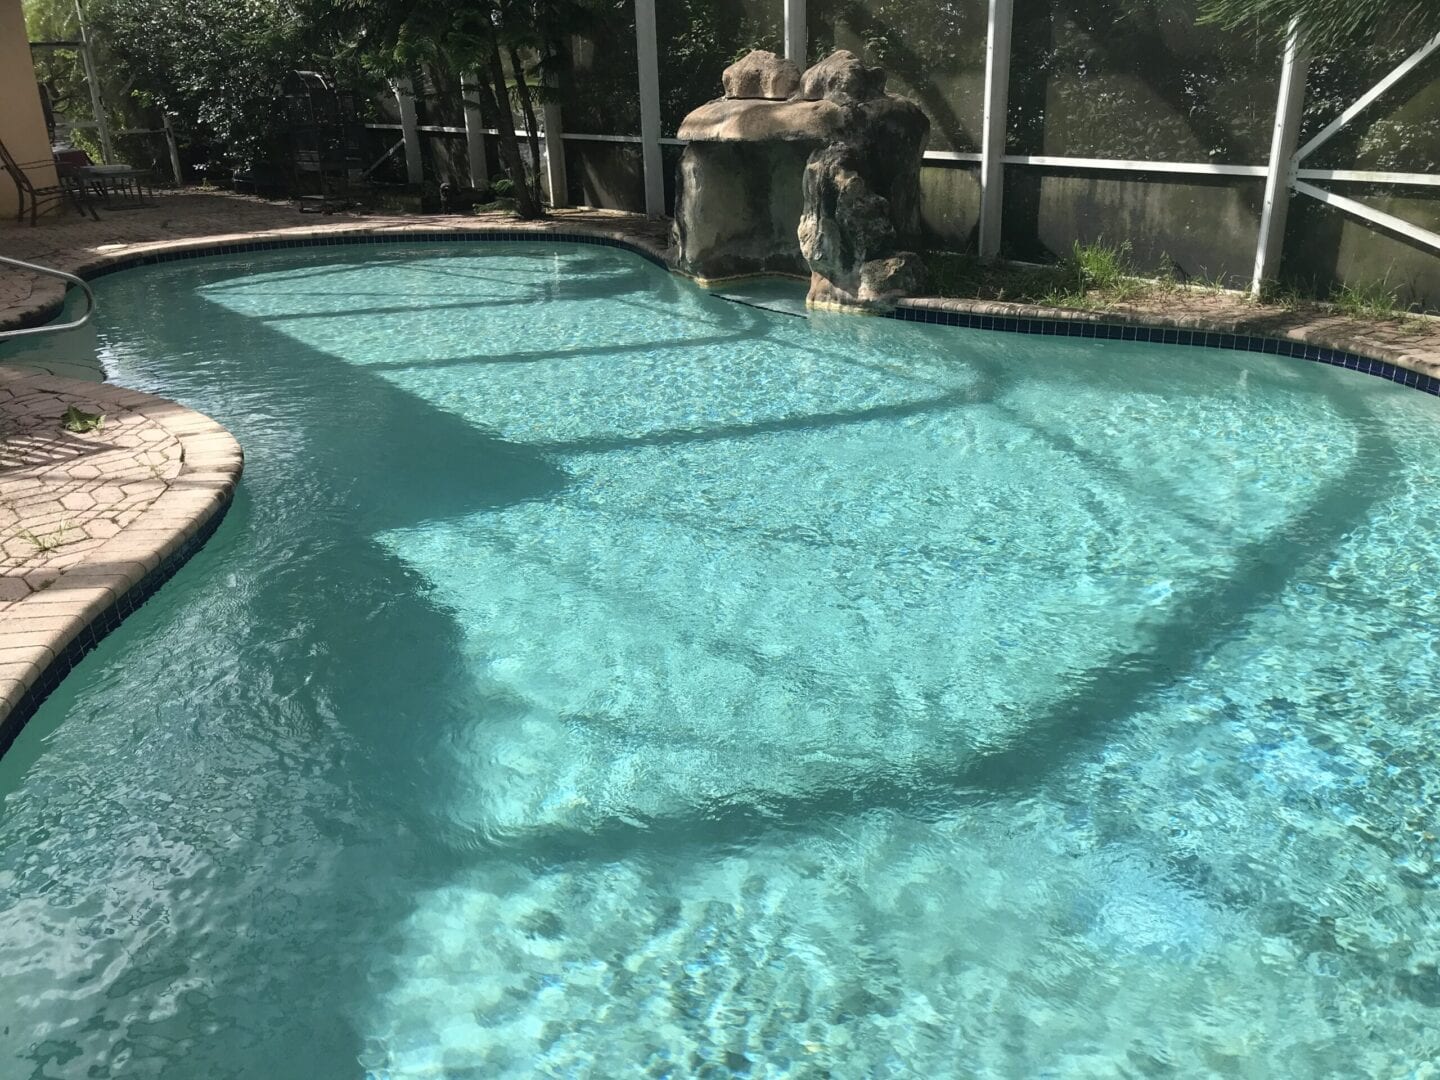 Curvy oval pool with stone structure feature on one side